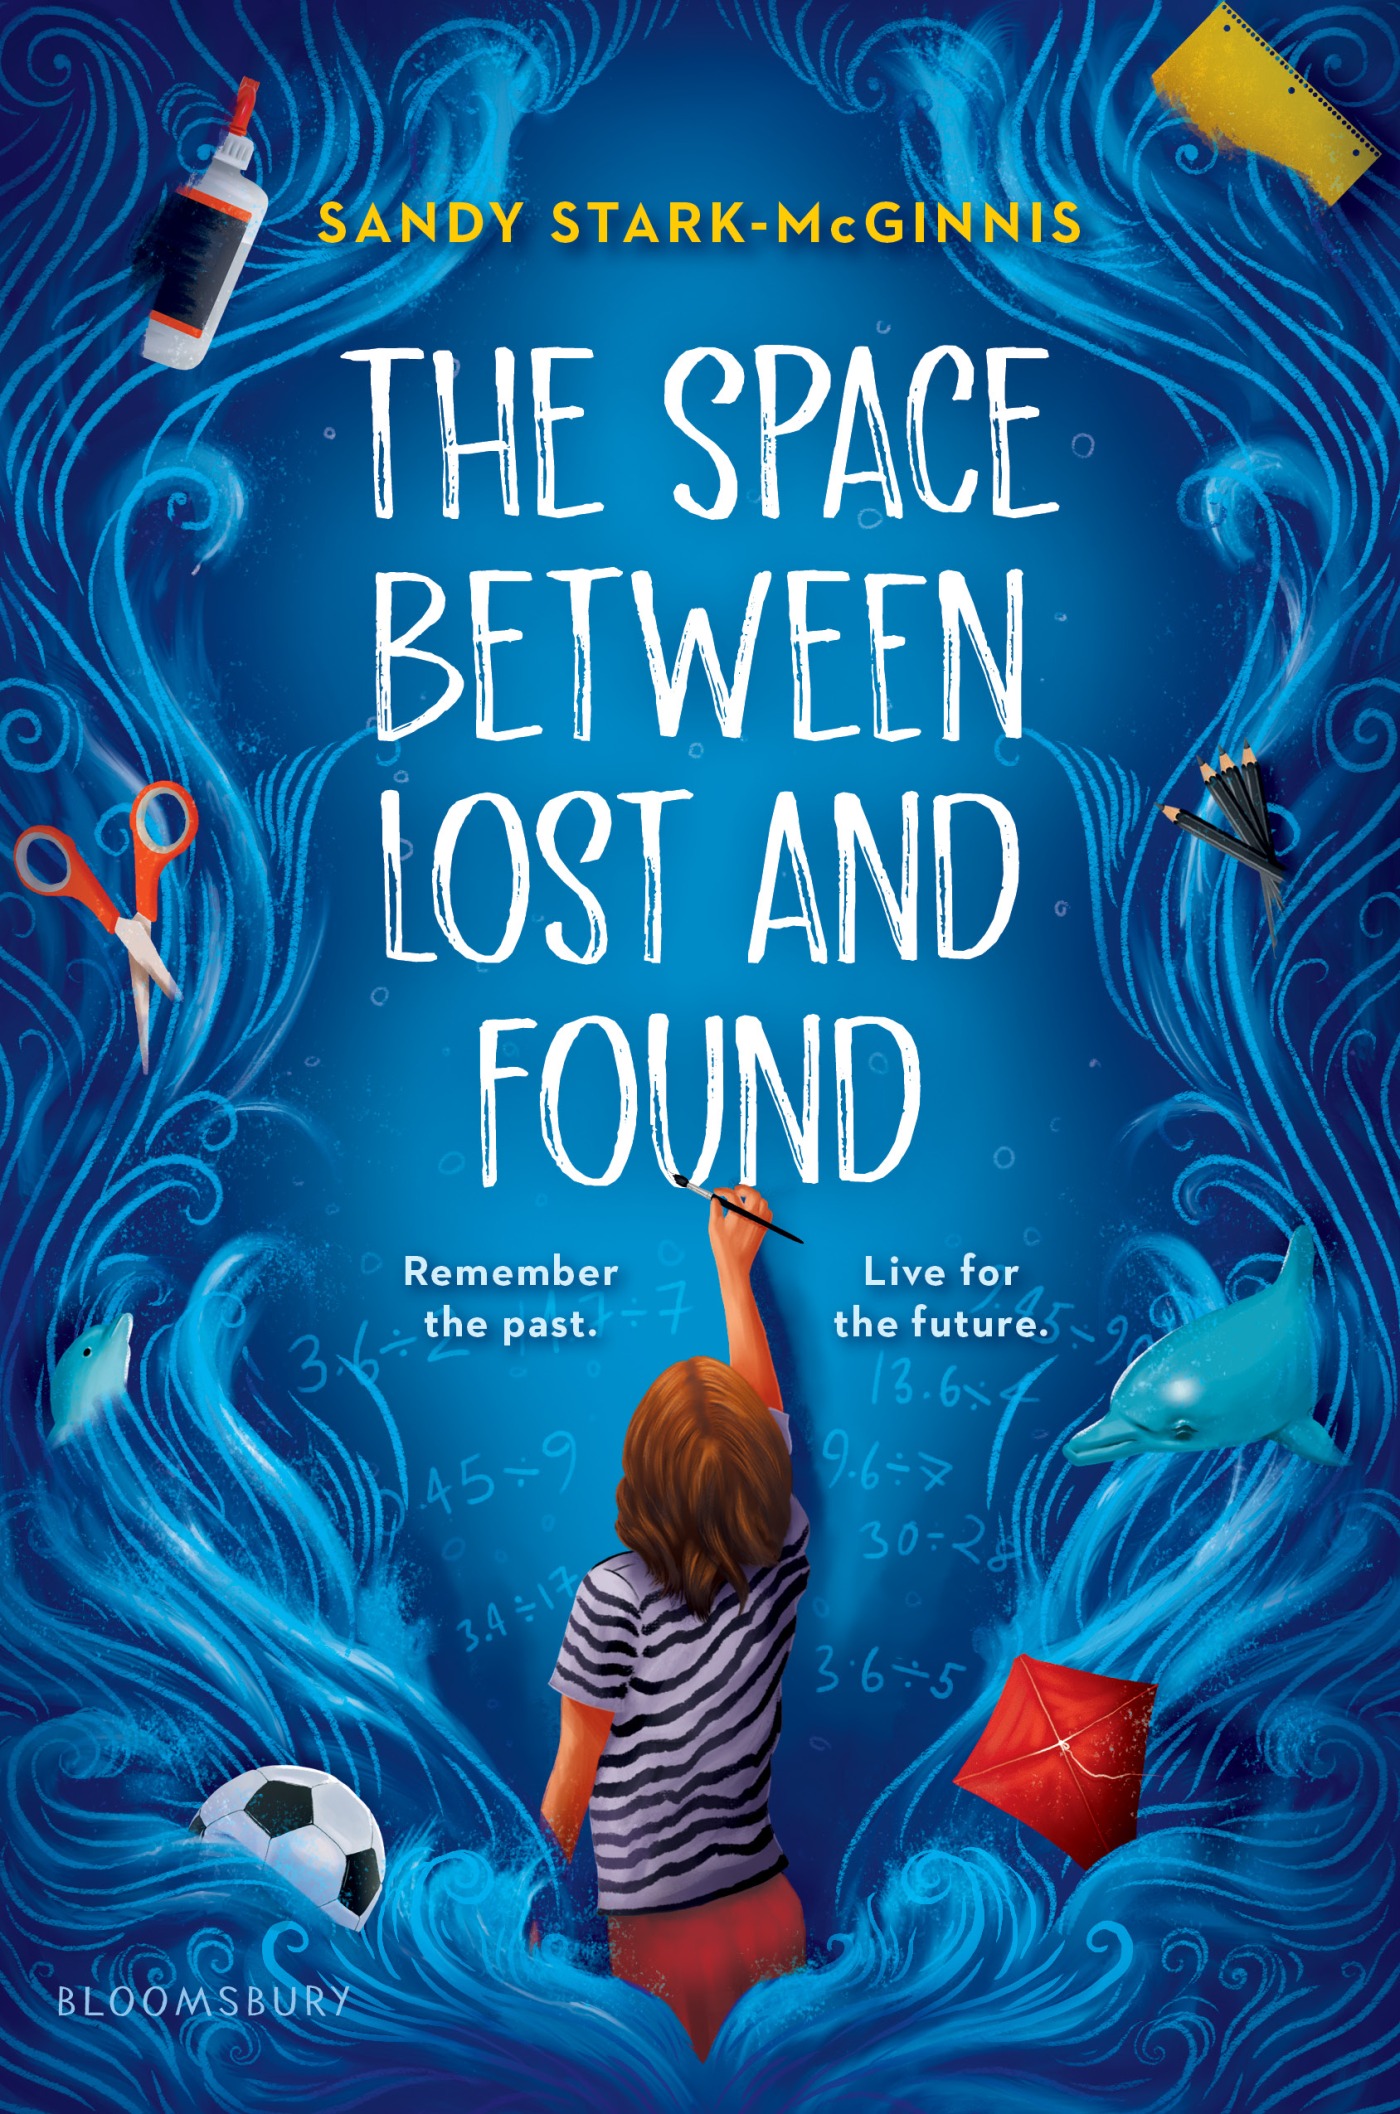 Front cover image of The Space Between Lost and Found of a person writing on the cover with scissors, paint, soccer ball, kite and dolphin in the blue waves surrounding the outside of the book